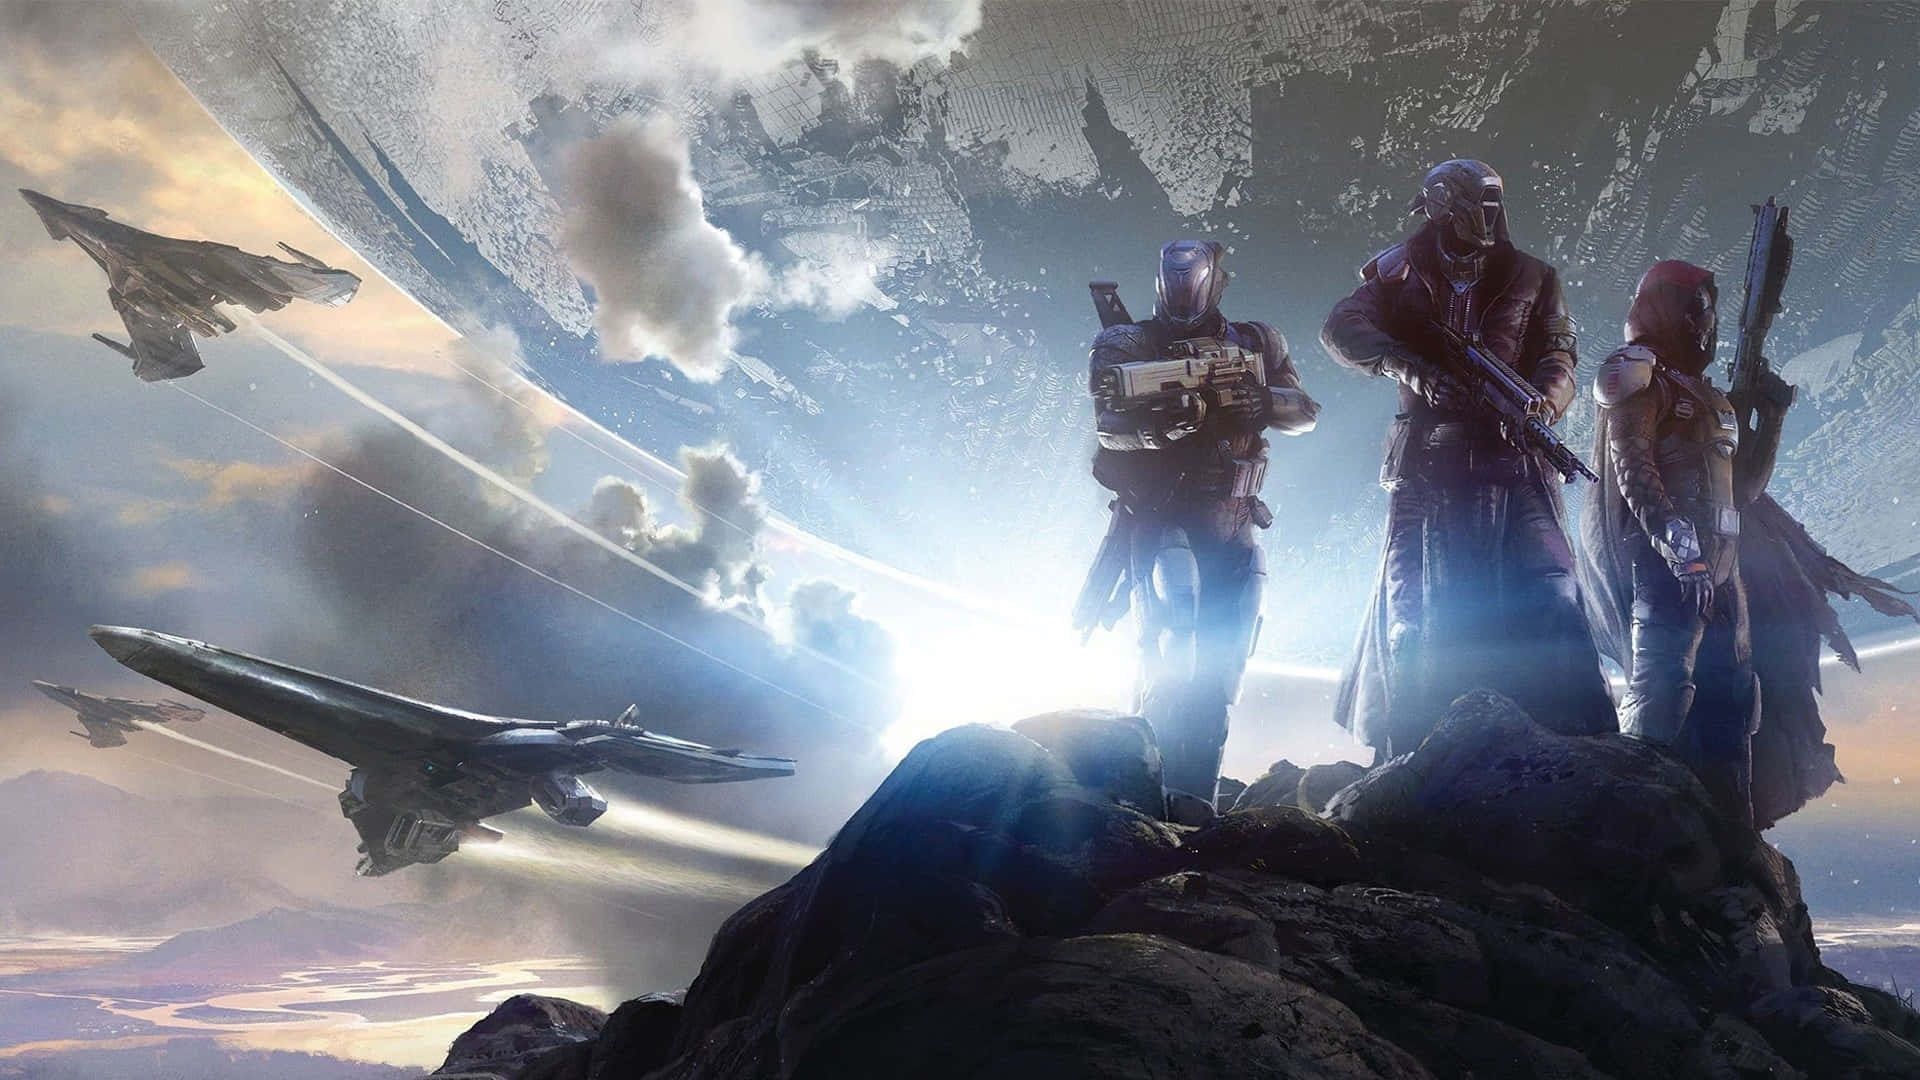 Heroes Unite - Destiny Characters in Action Wallpaper